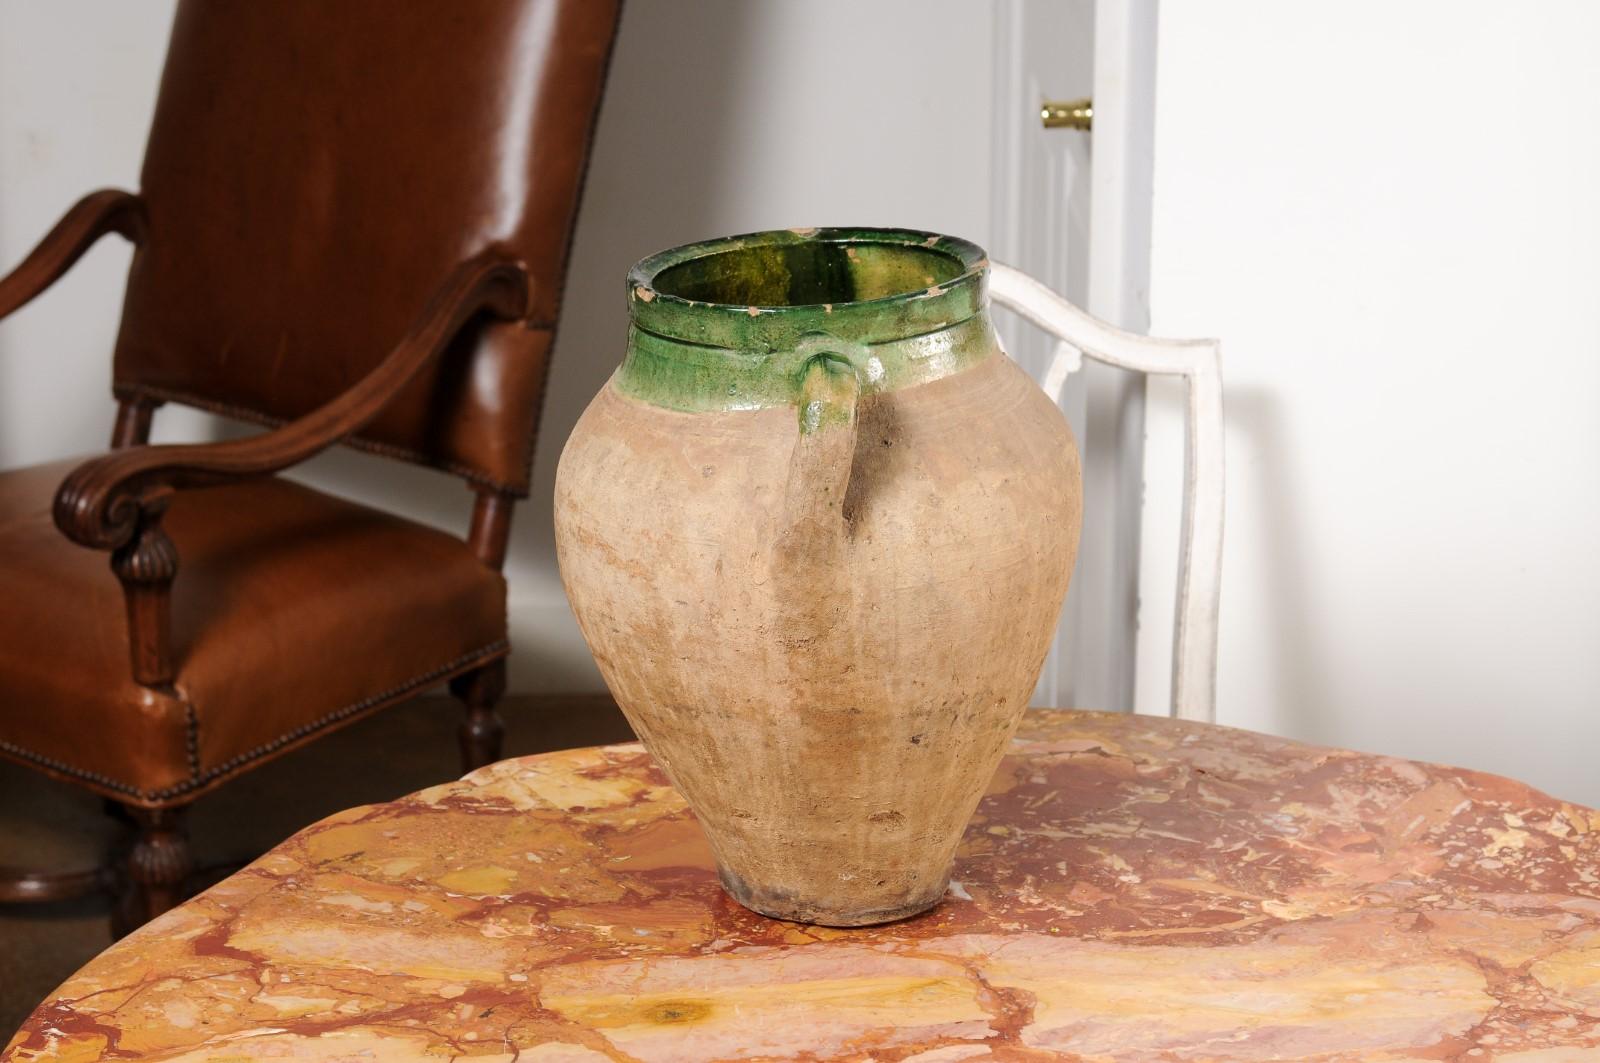 English Rustic 1930s Terracotta Olive Oil Jar Circa 1930 with Green Glazed Top For Sale 4